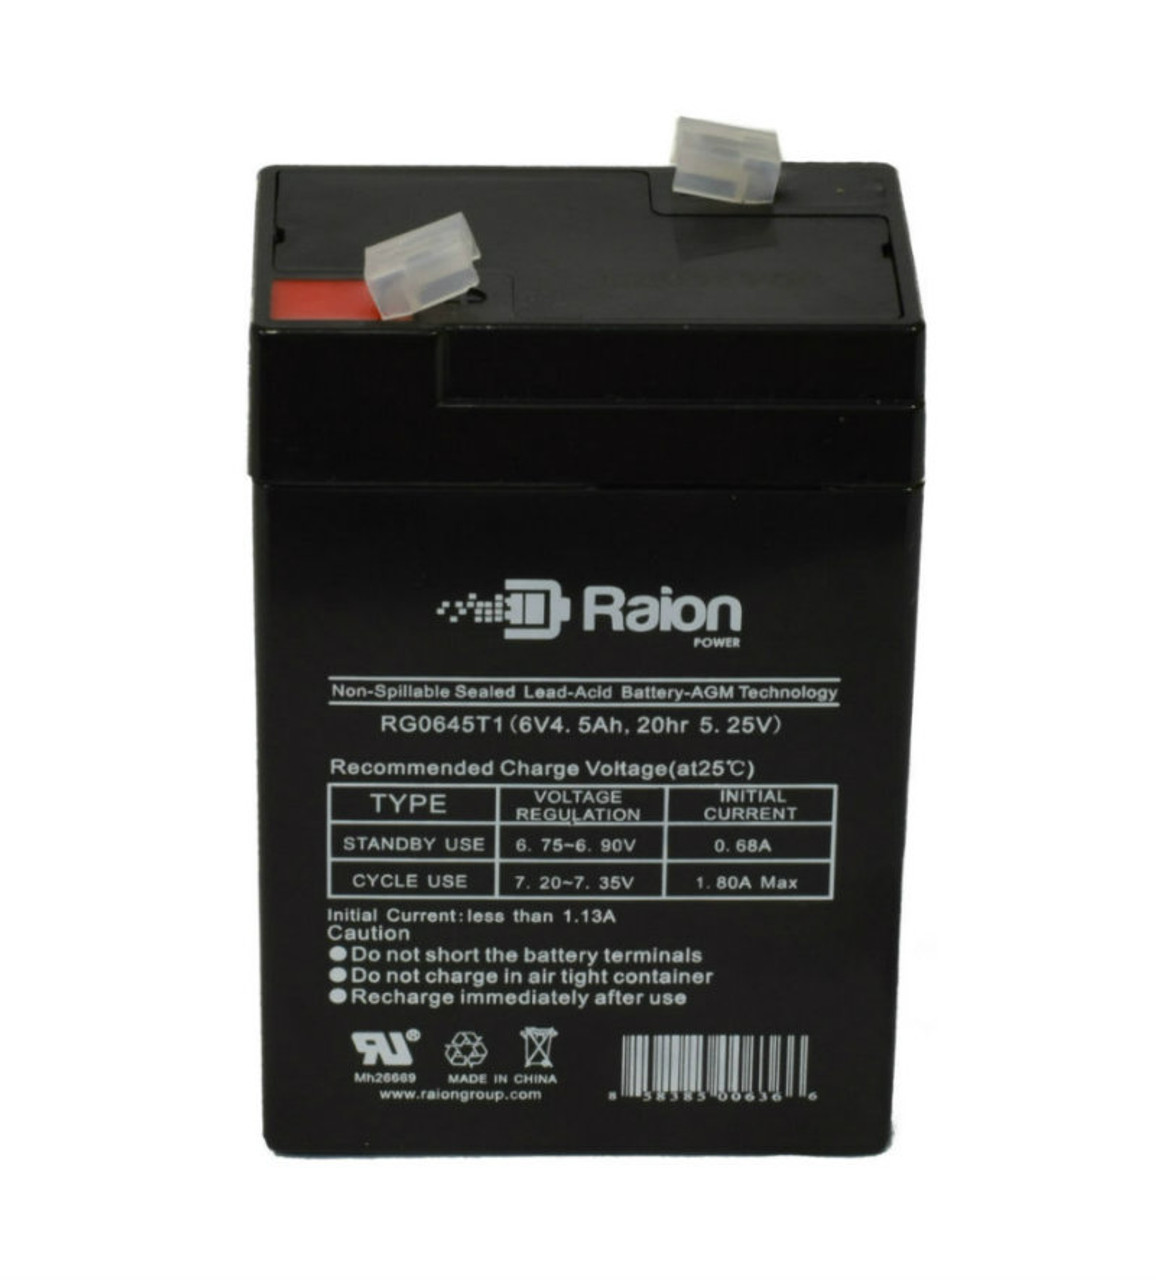 Raion Power RG0645T1 Replacement Battery for Zareba LIS3B Electric Fence Charger